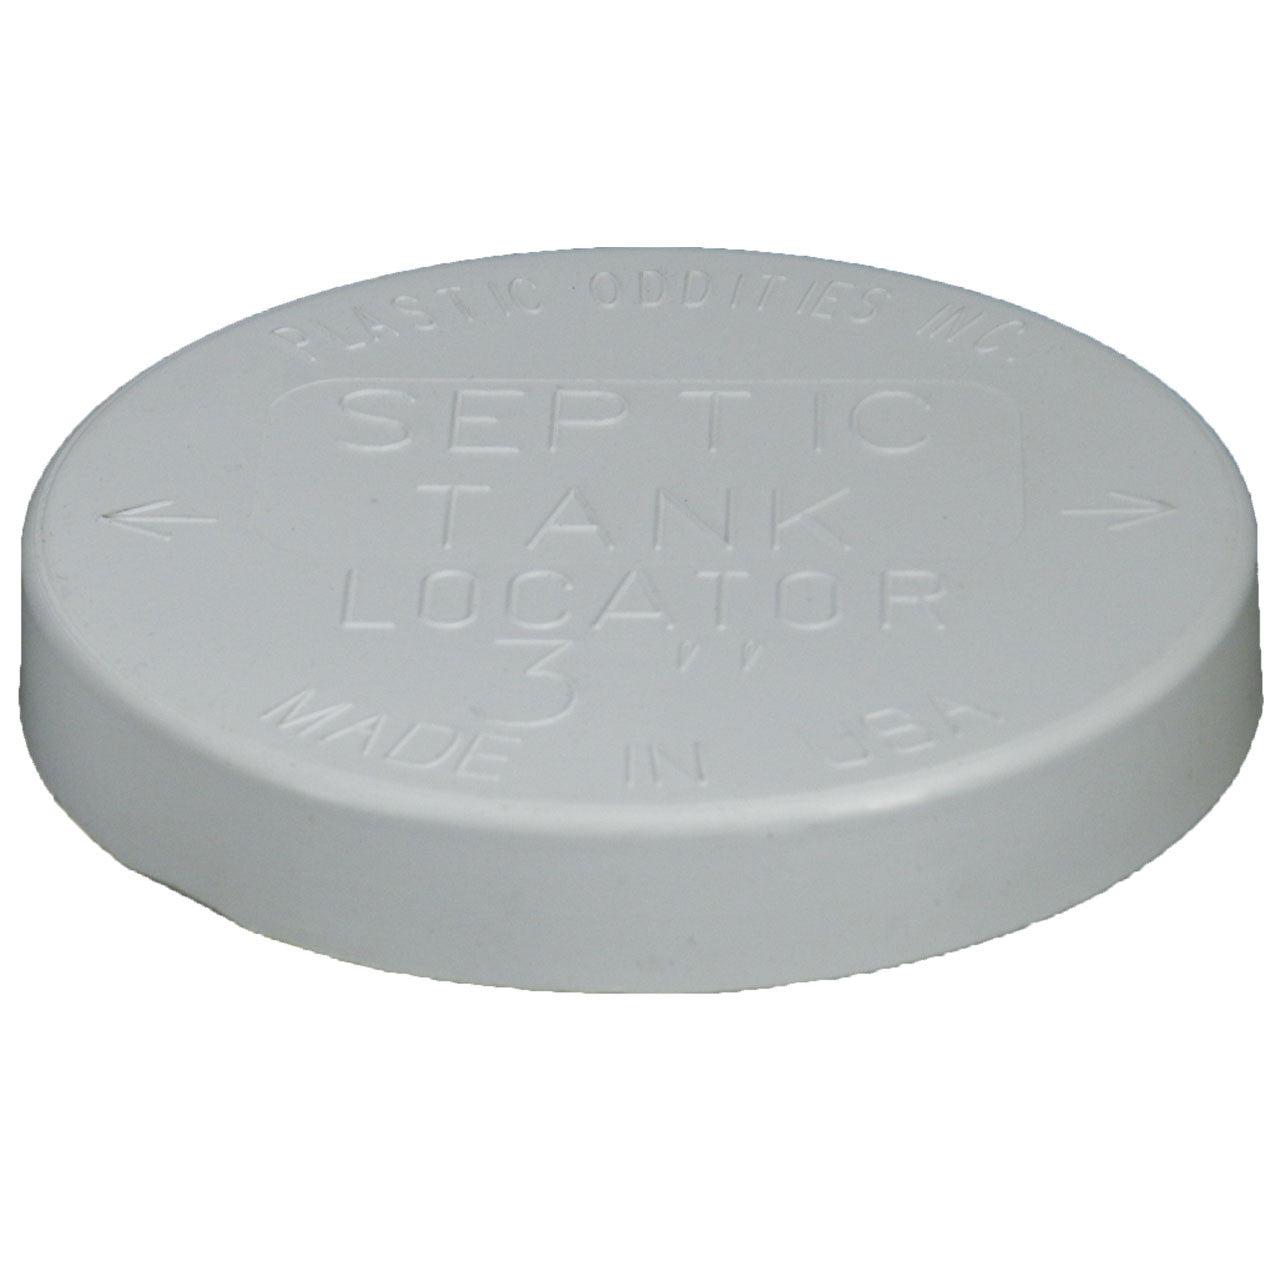 End Cap and Septic Tank Locator ( Pack of 25 )